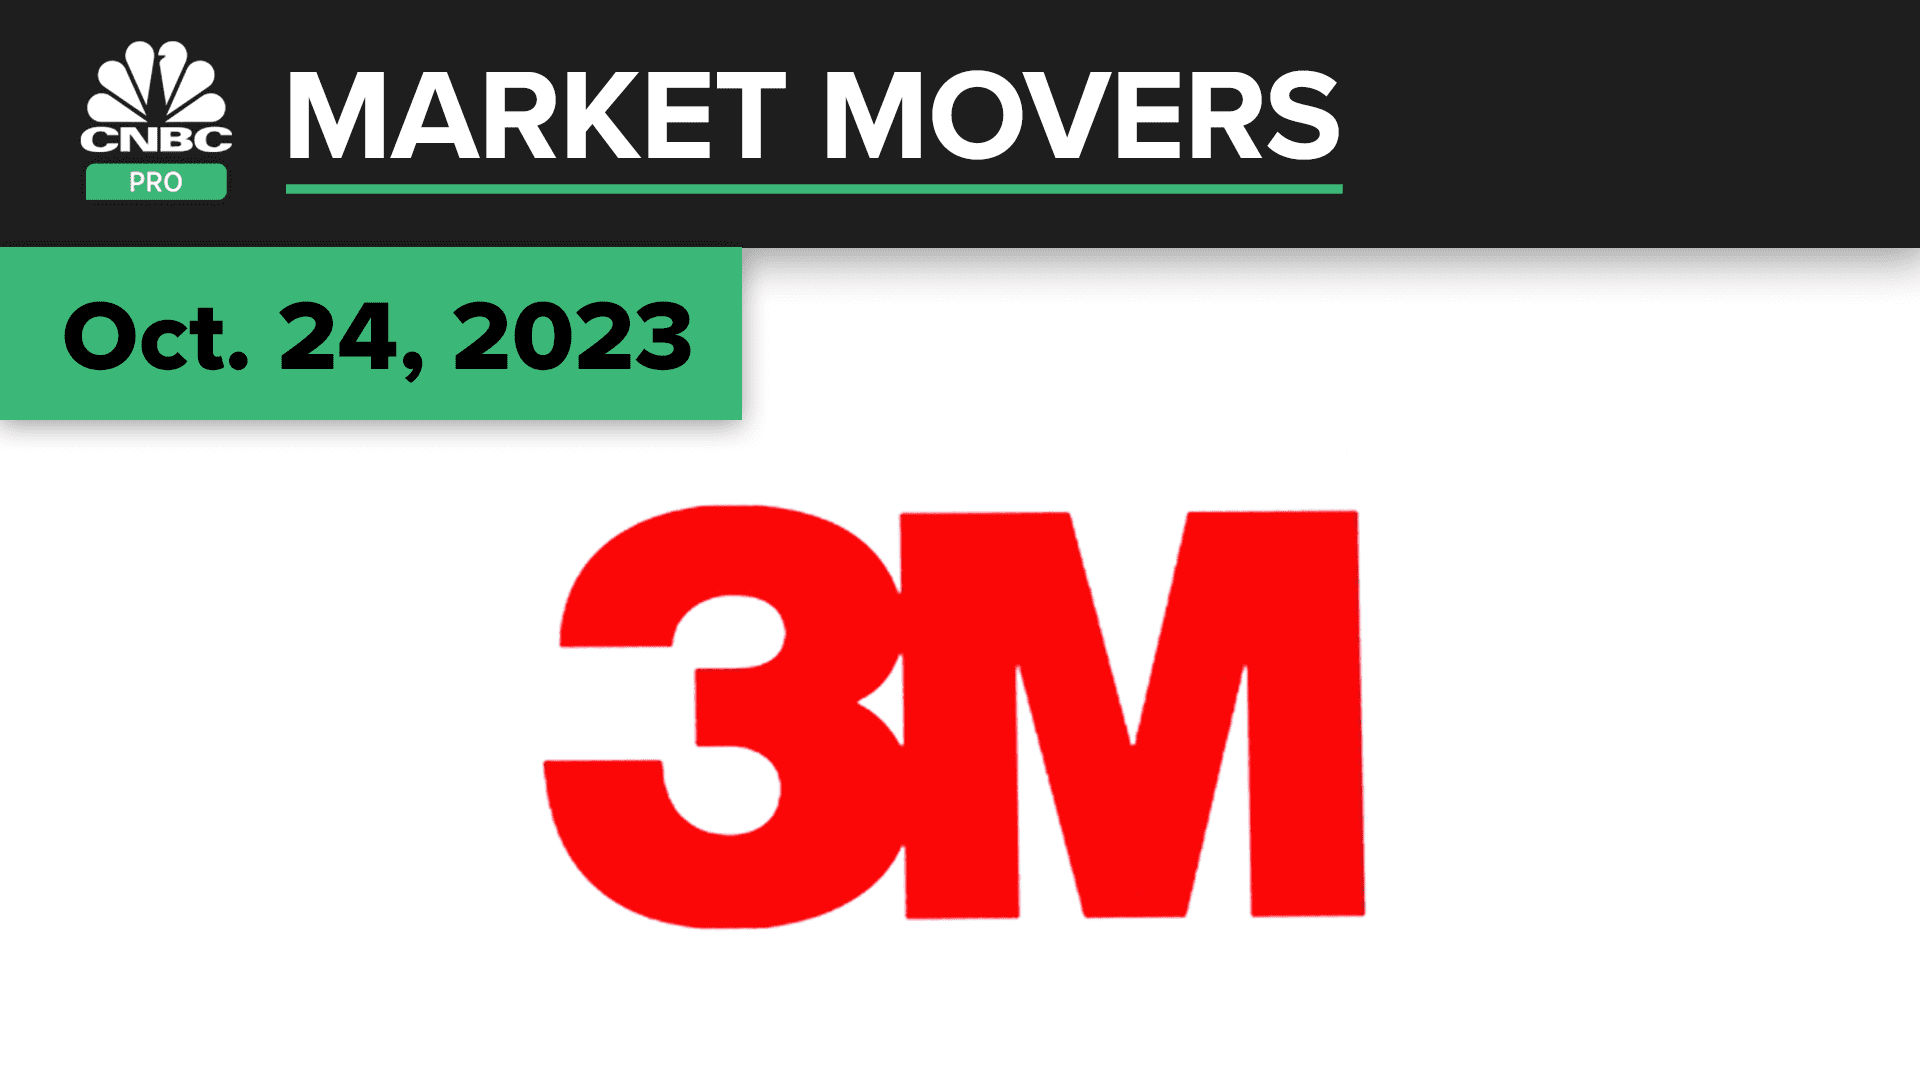 3M beats on the top and bottom lines. Here’s what the pros are saying